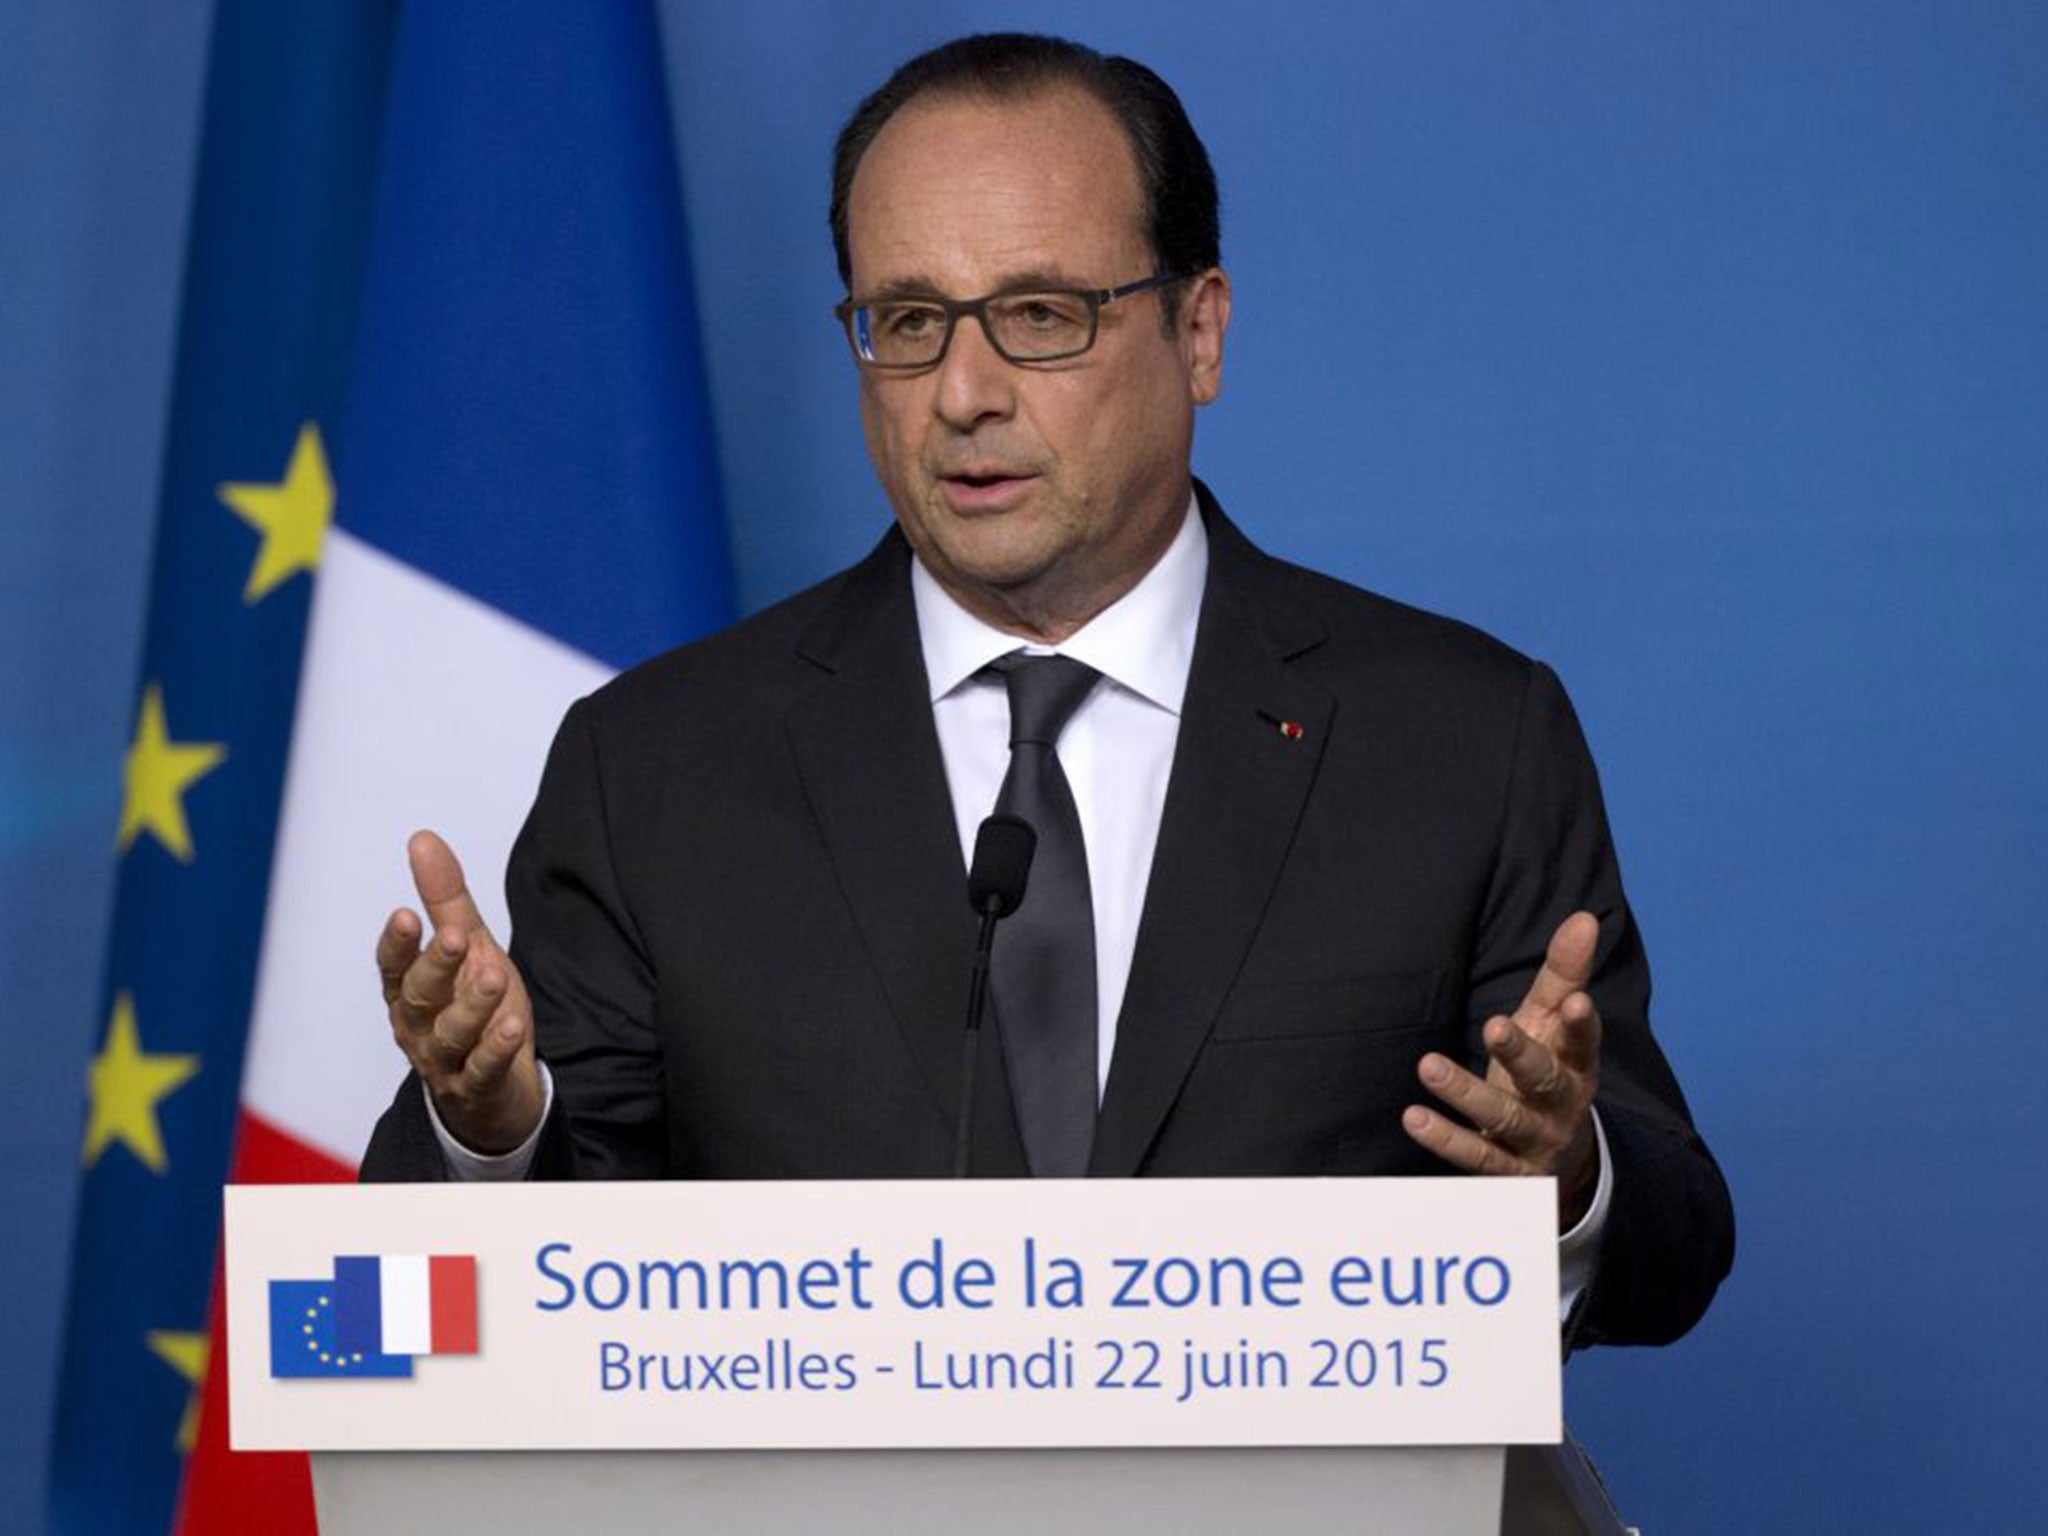 French President Francois Hollande speaks during a media conference at an EU summit in Brussels. WikiLeaks published documents on Tuesday, that it says show the US National Security Agency eavesdropped on the last three French presidents.